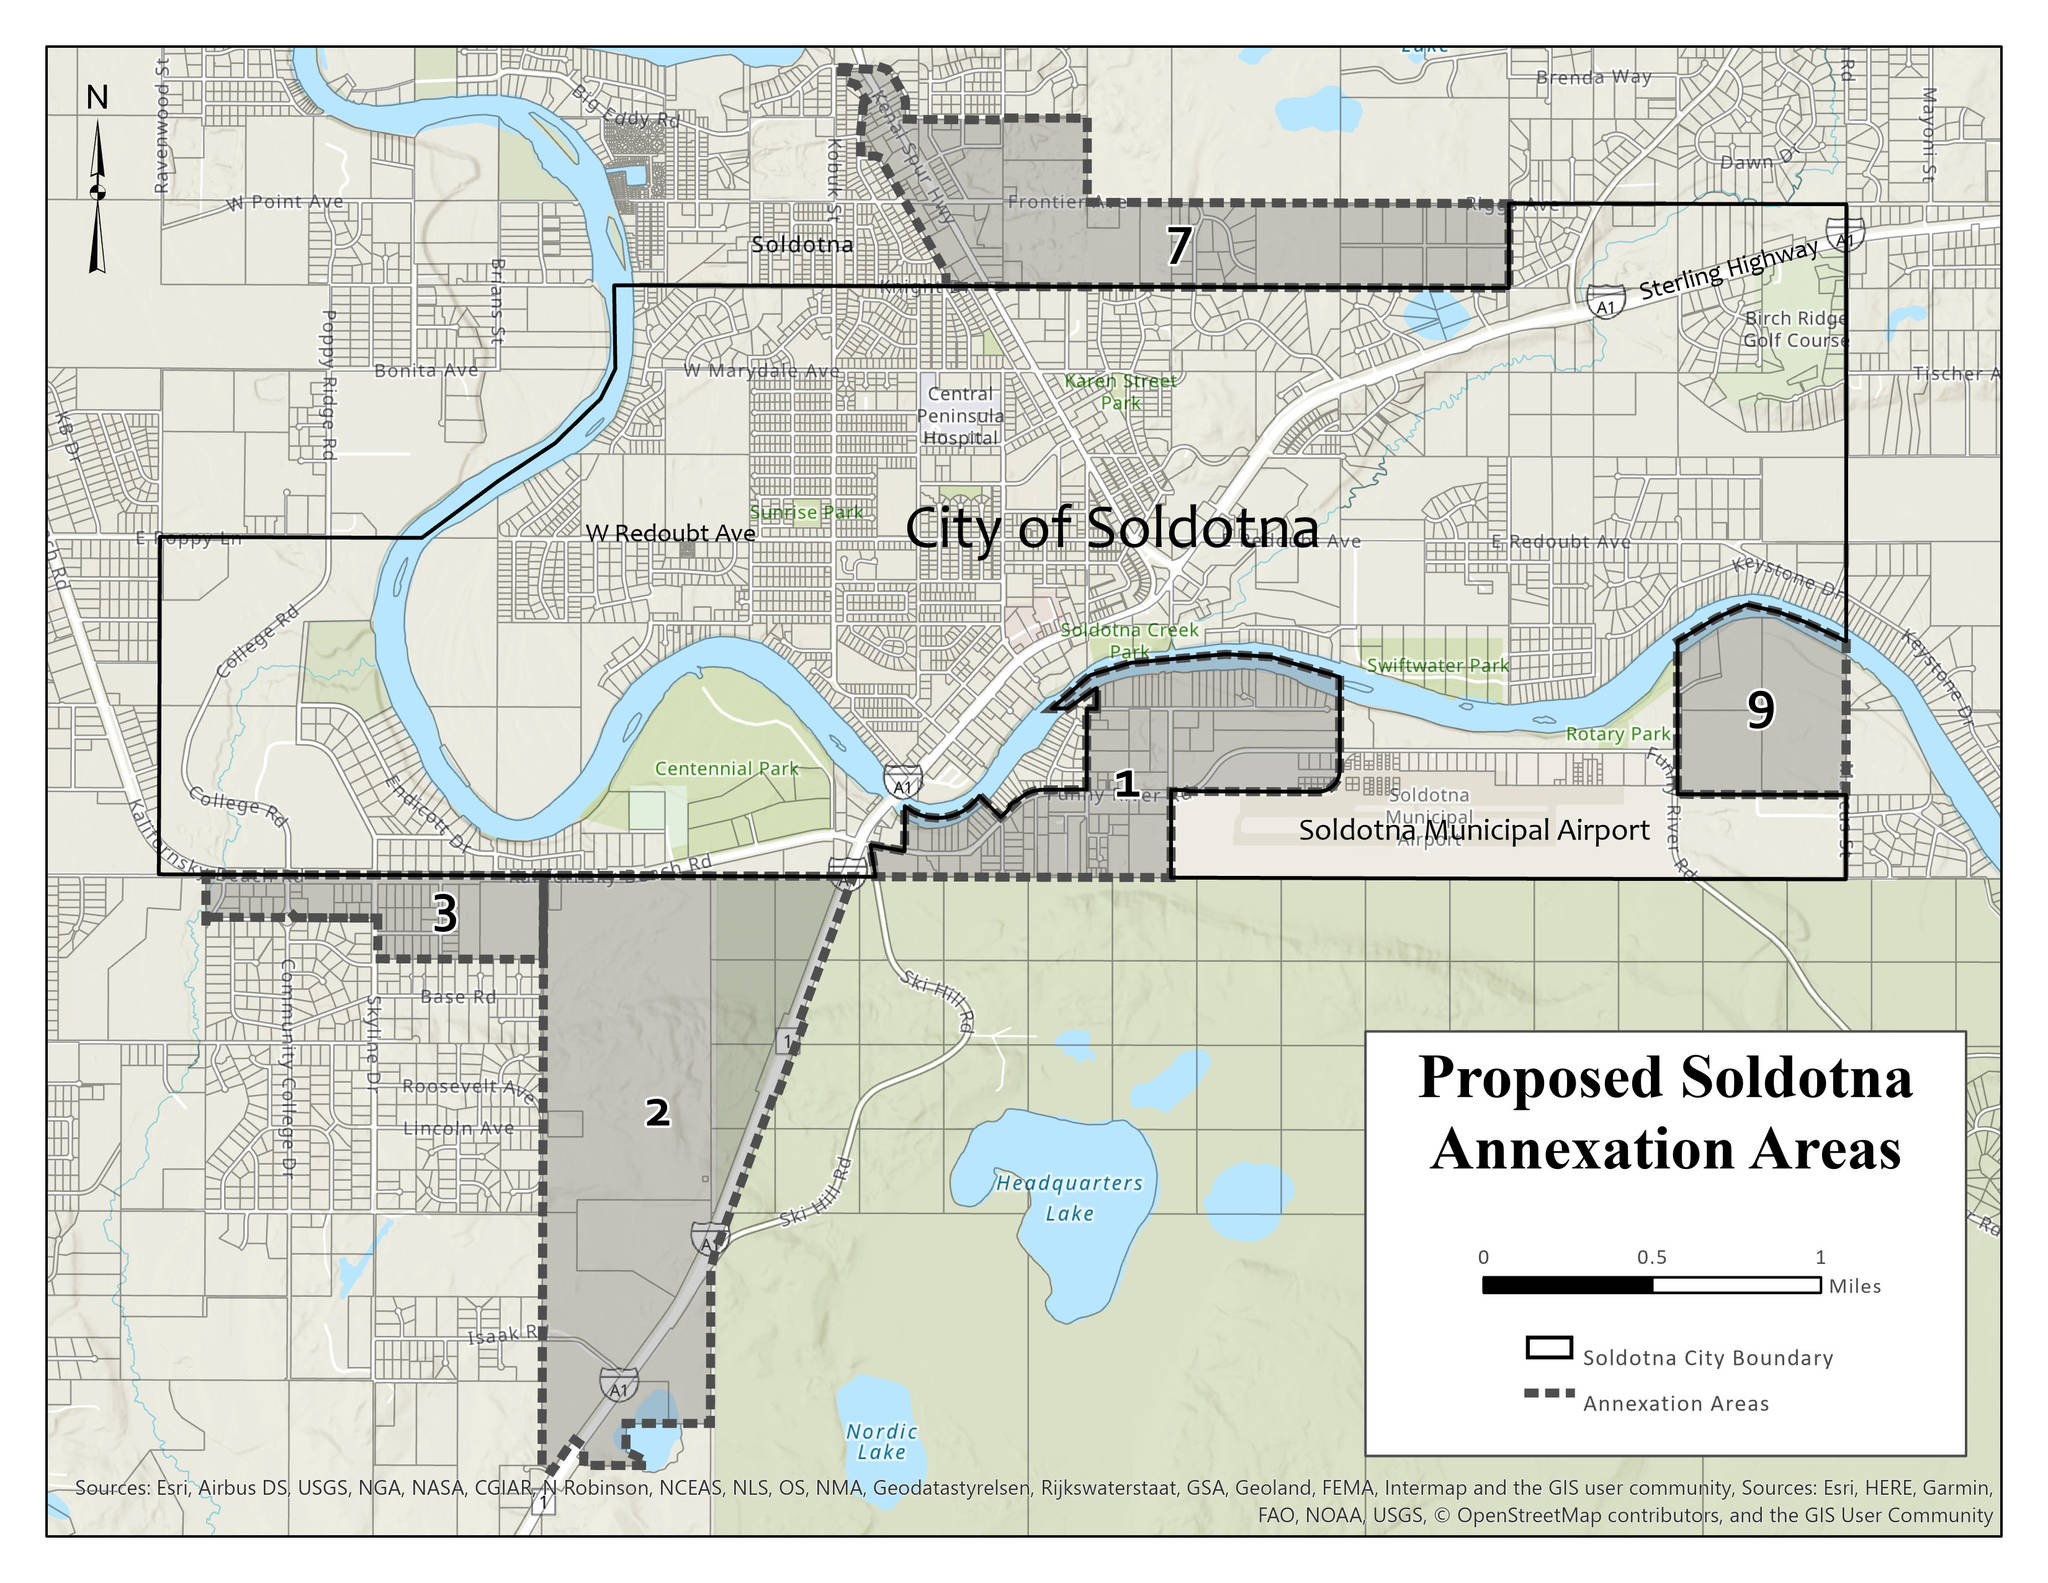 A map of the proposed Soldotna annexation areas. (Courtesy Alaska Local Boundary Commission)